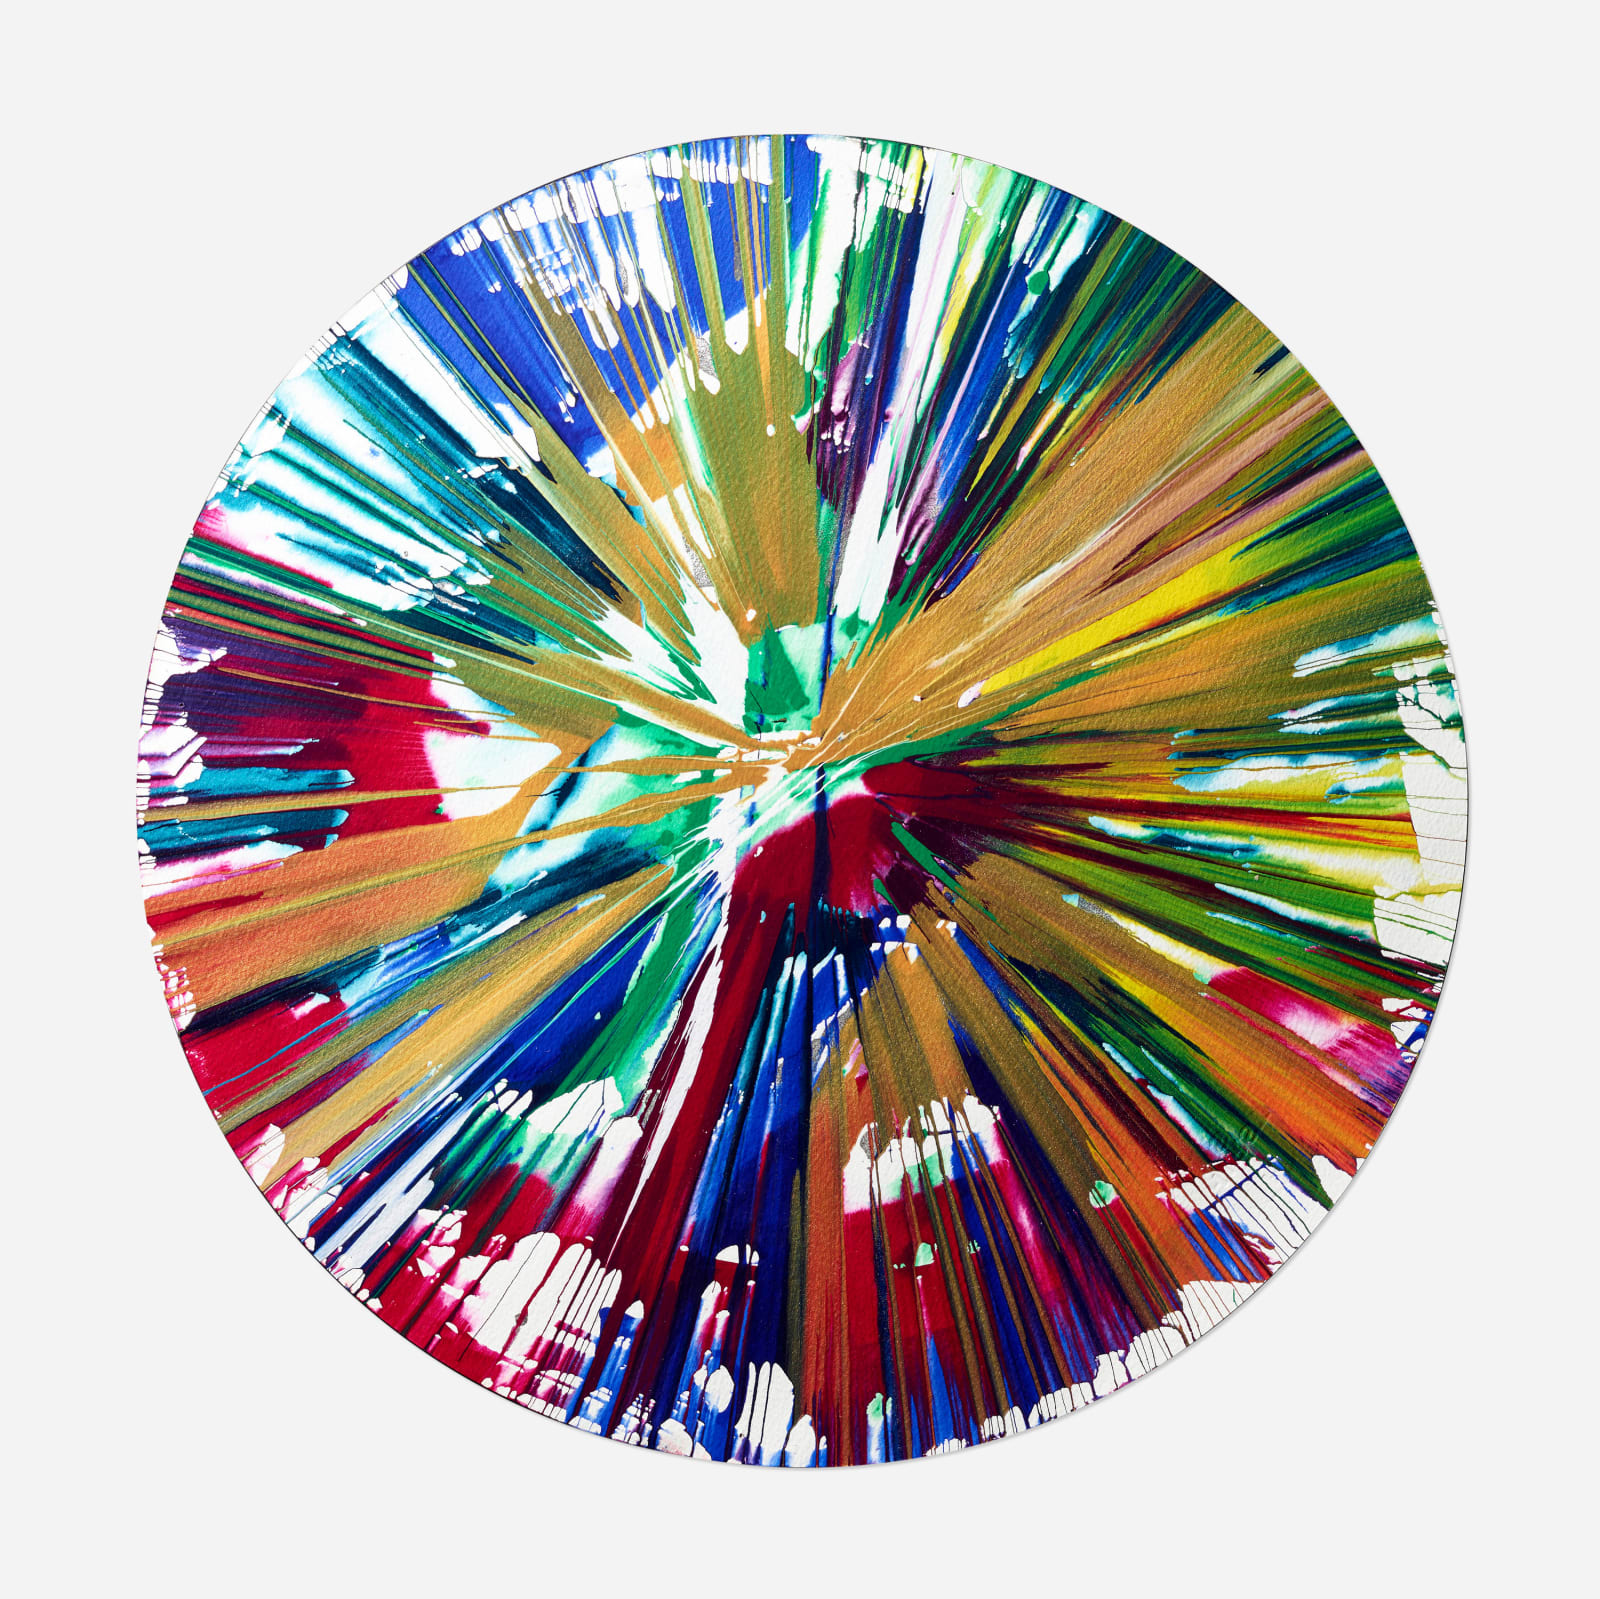 Damien Hirst, Circle Spin Painting, 2009 | LE Gallery